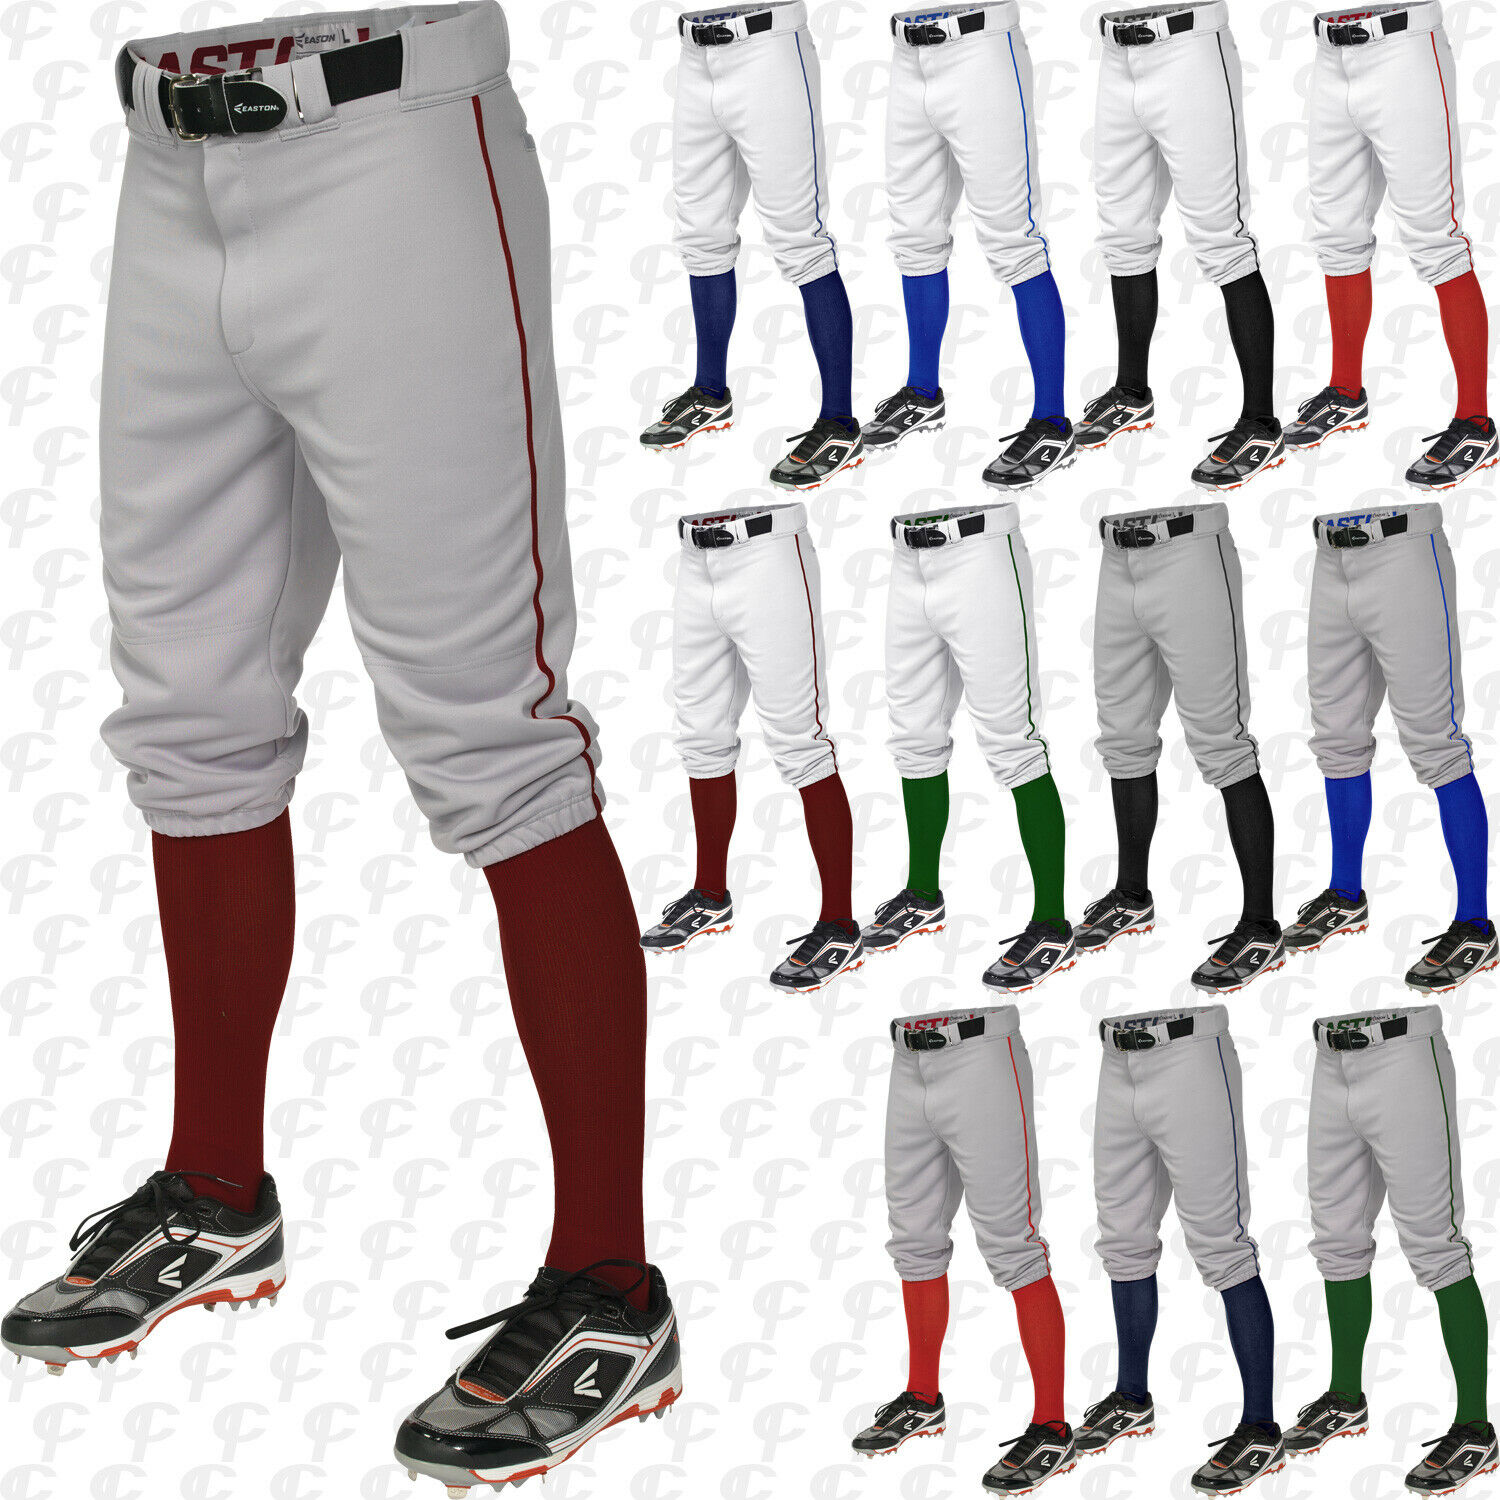 Easton Youth Boys Pro + Knicker Baseball Pants w Piped Piping Braid A167106